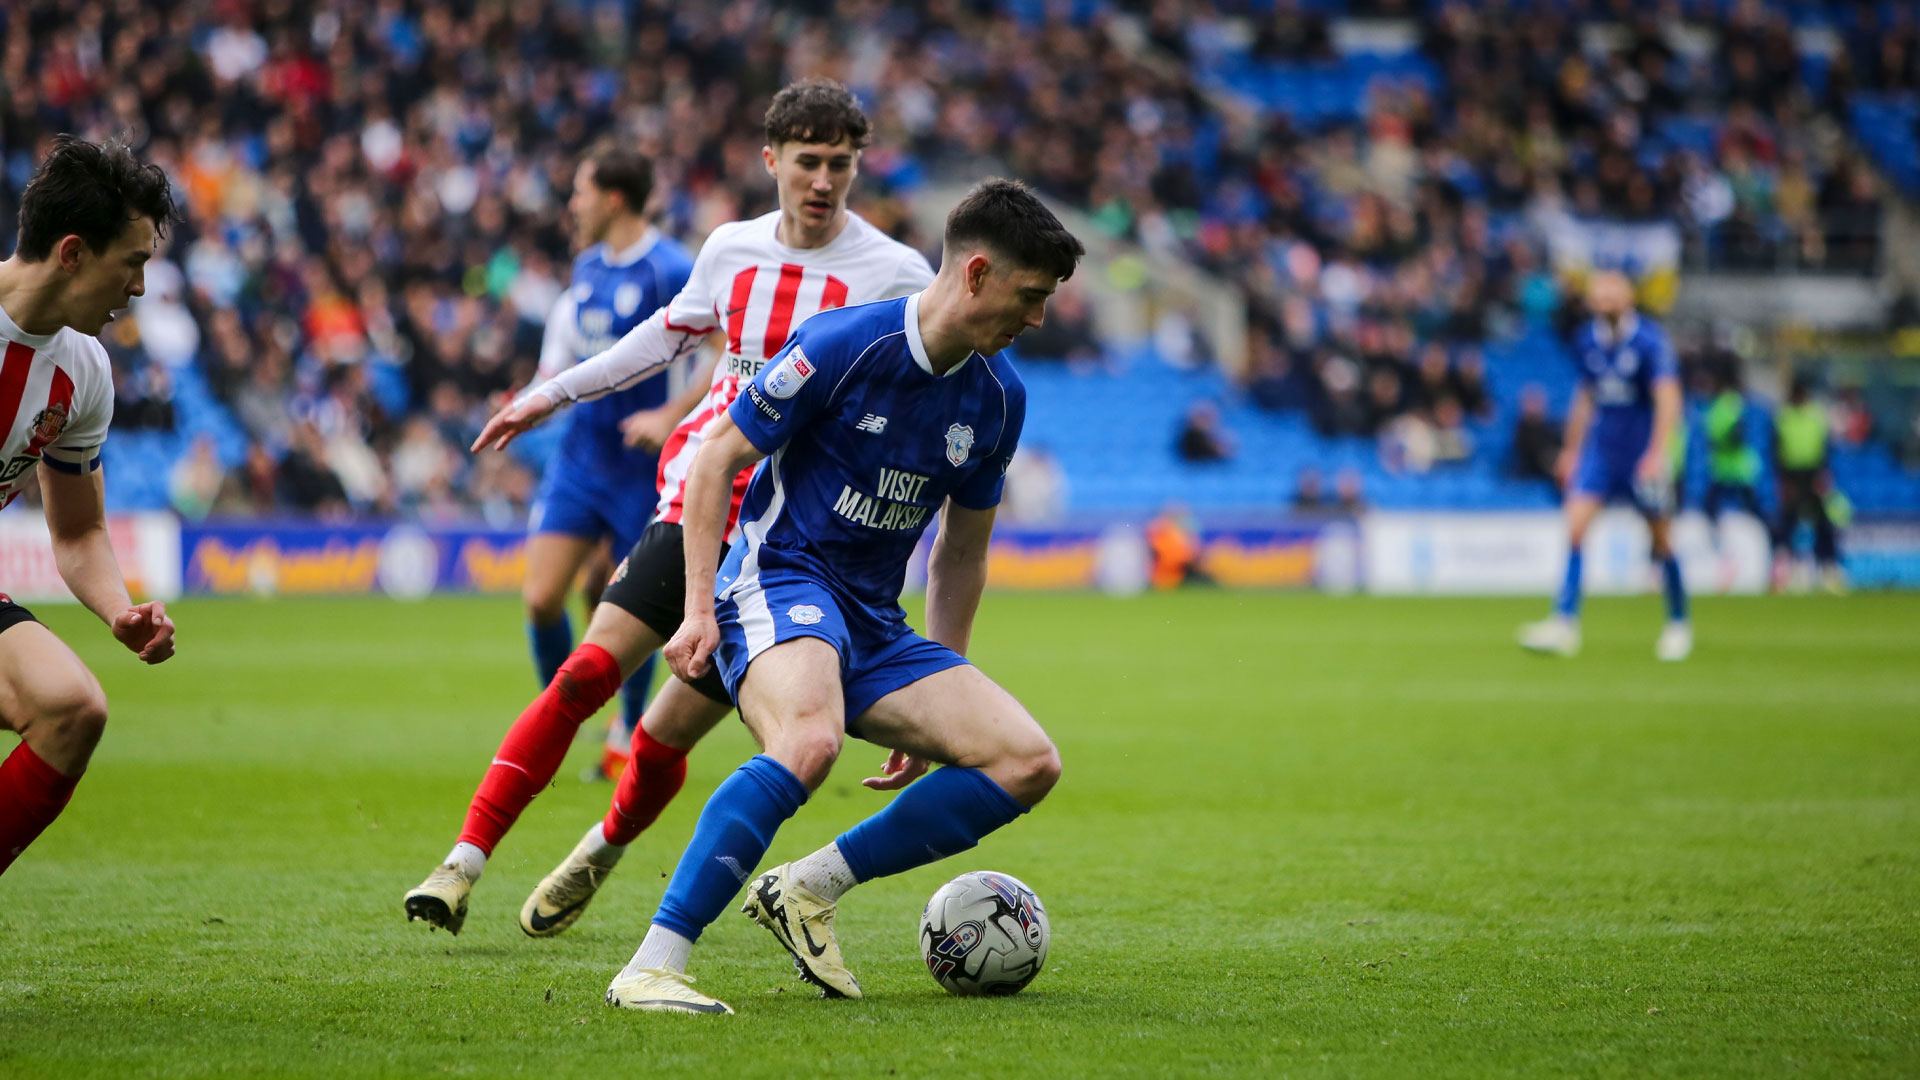 Callum O'Dowda in action for Cardiff City